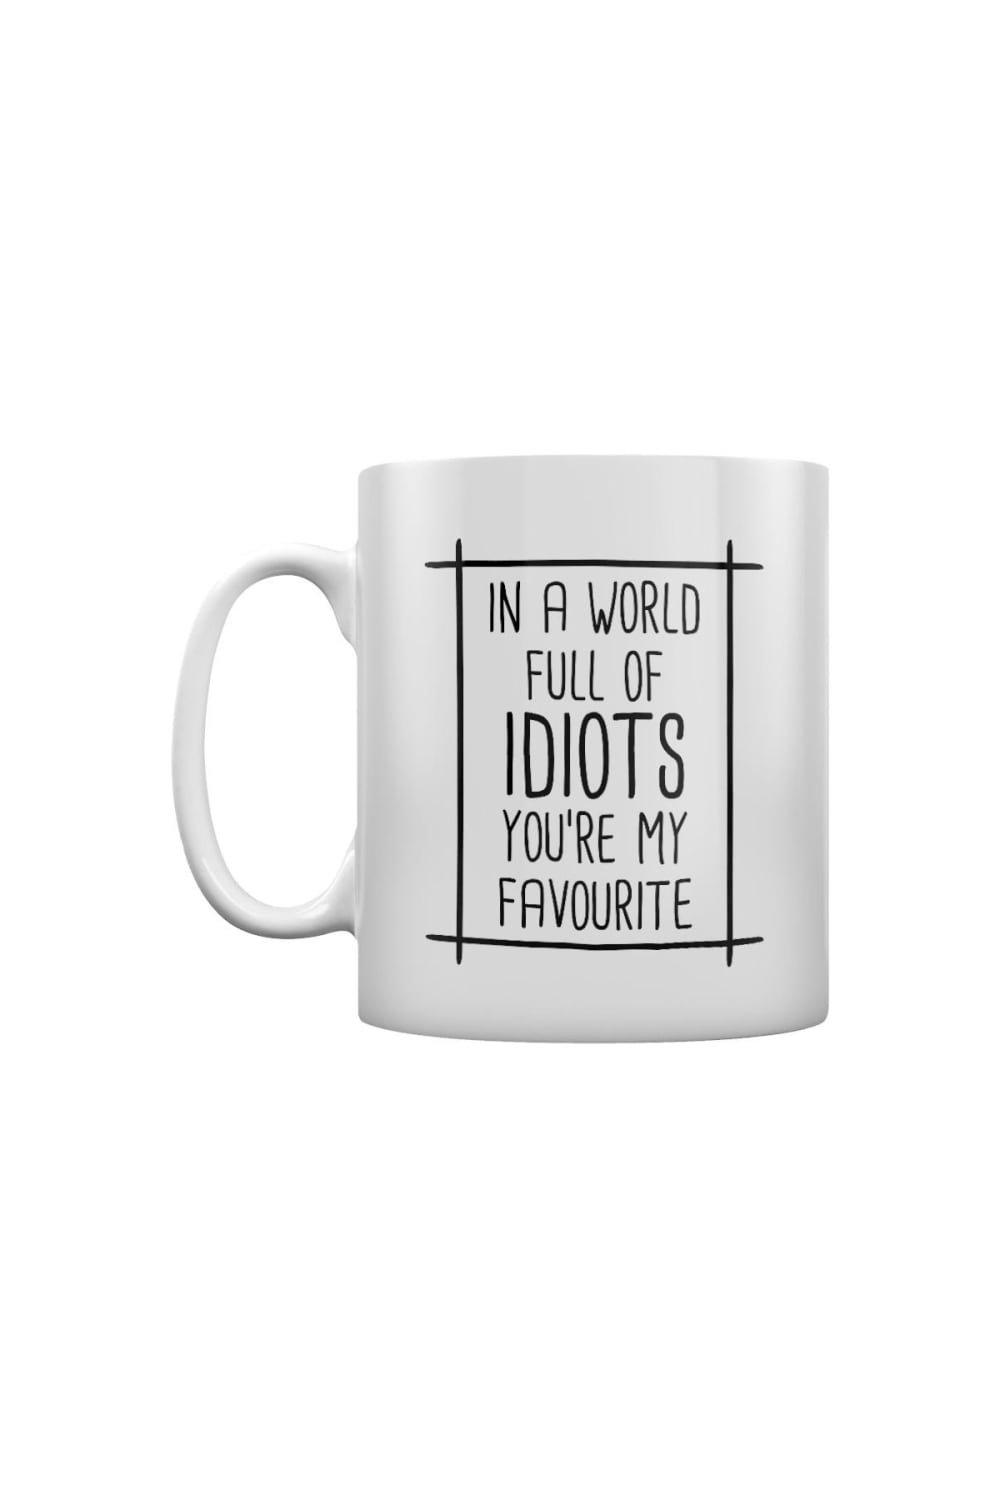 Photos - Mug / Cup In A World Full Of Idiots Youre My Favourite Mug